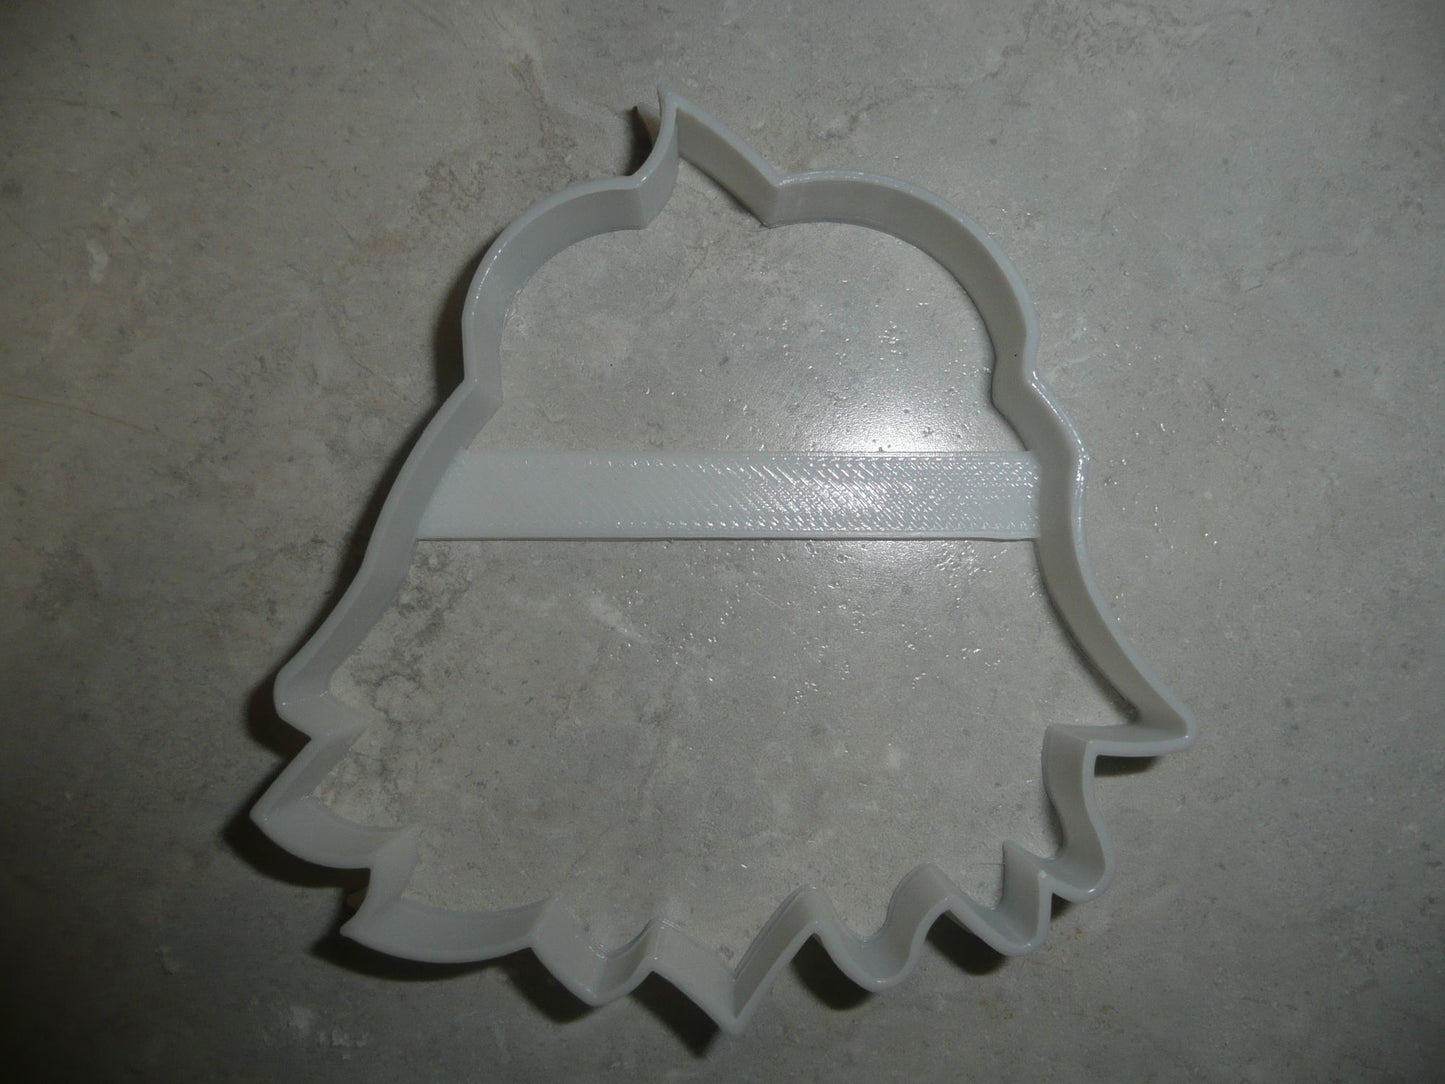 Bumble the Abominable Snowman Rudolph Christmas Cartoon Cookie Cutter USA PR3194